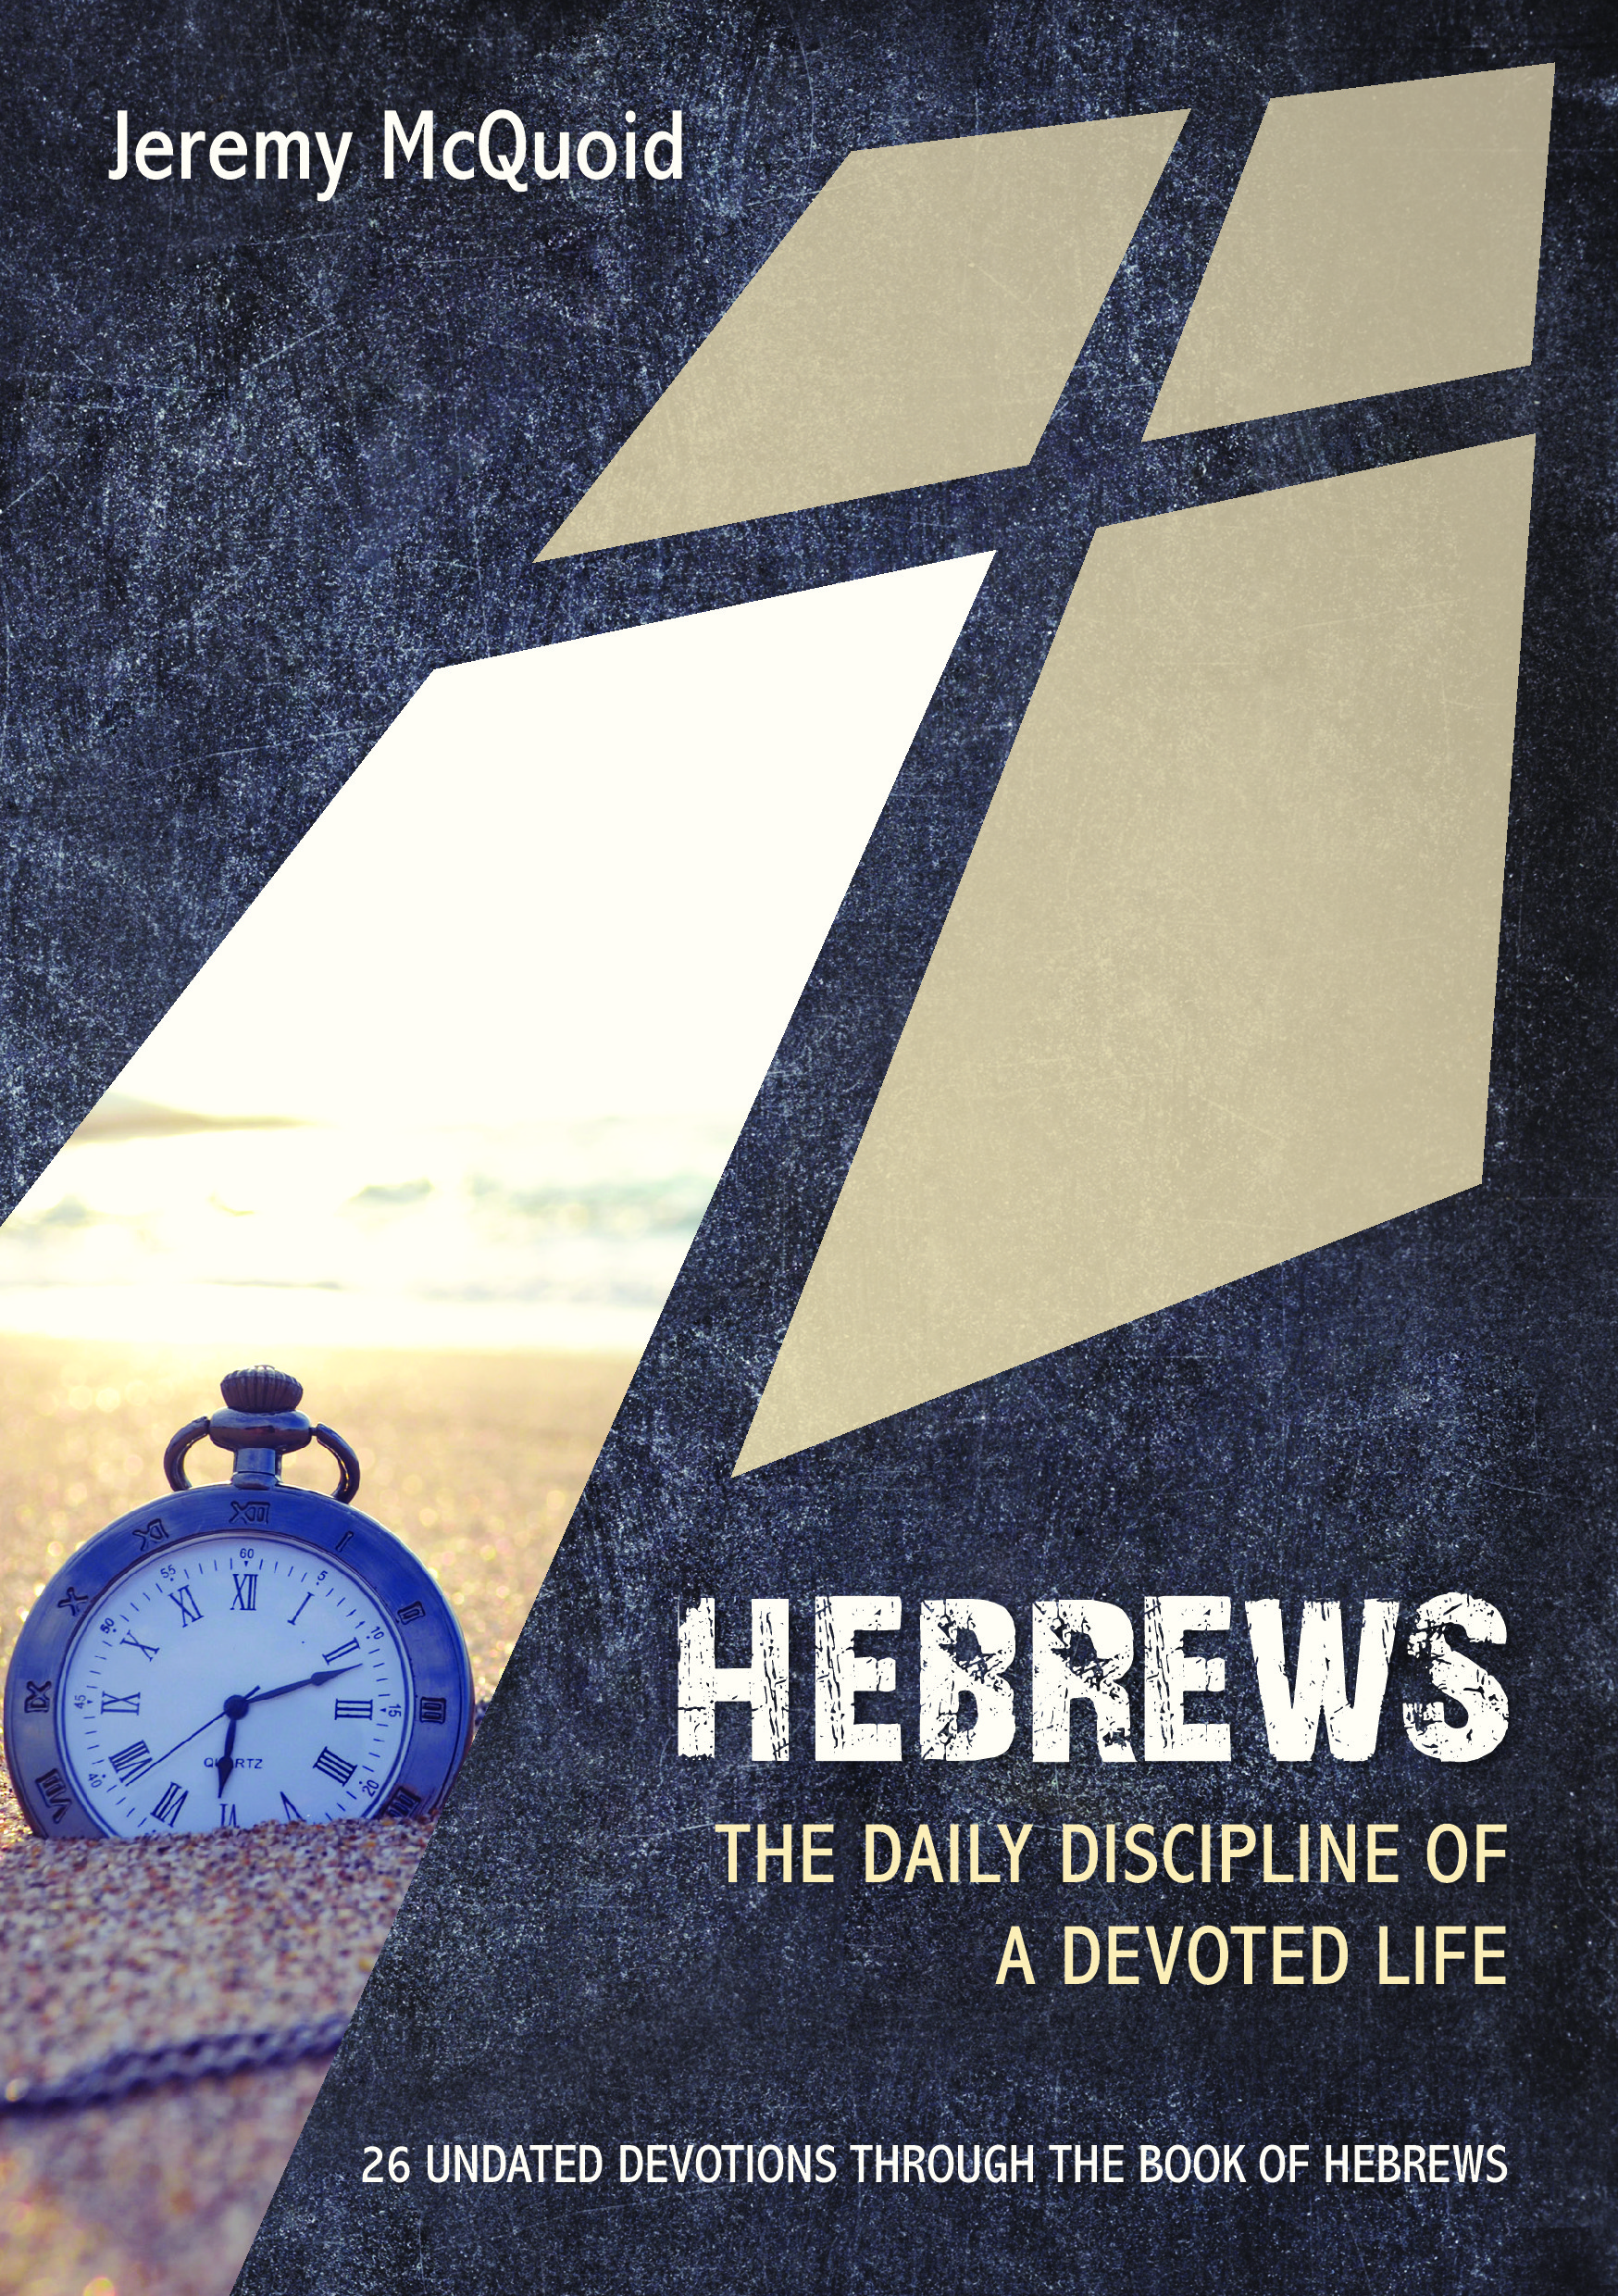 Hebrews - The Daily Discipline of a Devoted Life